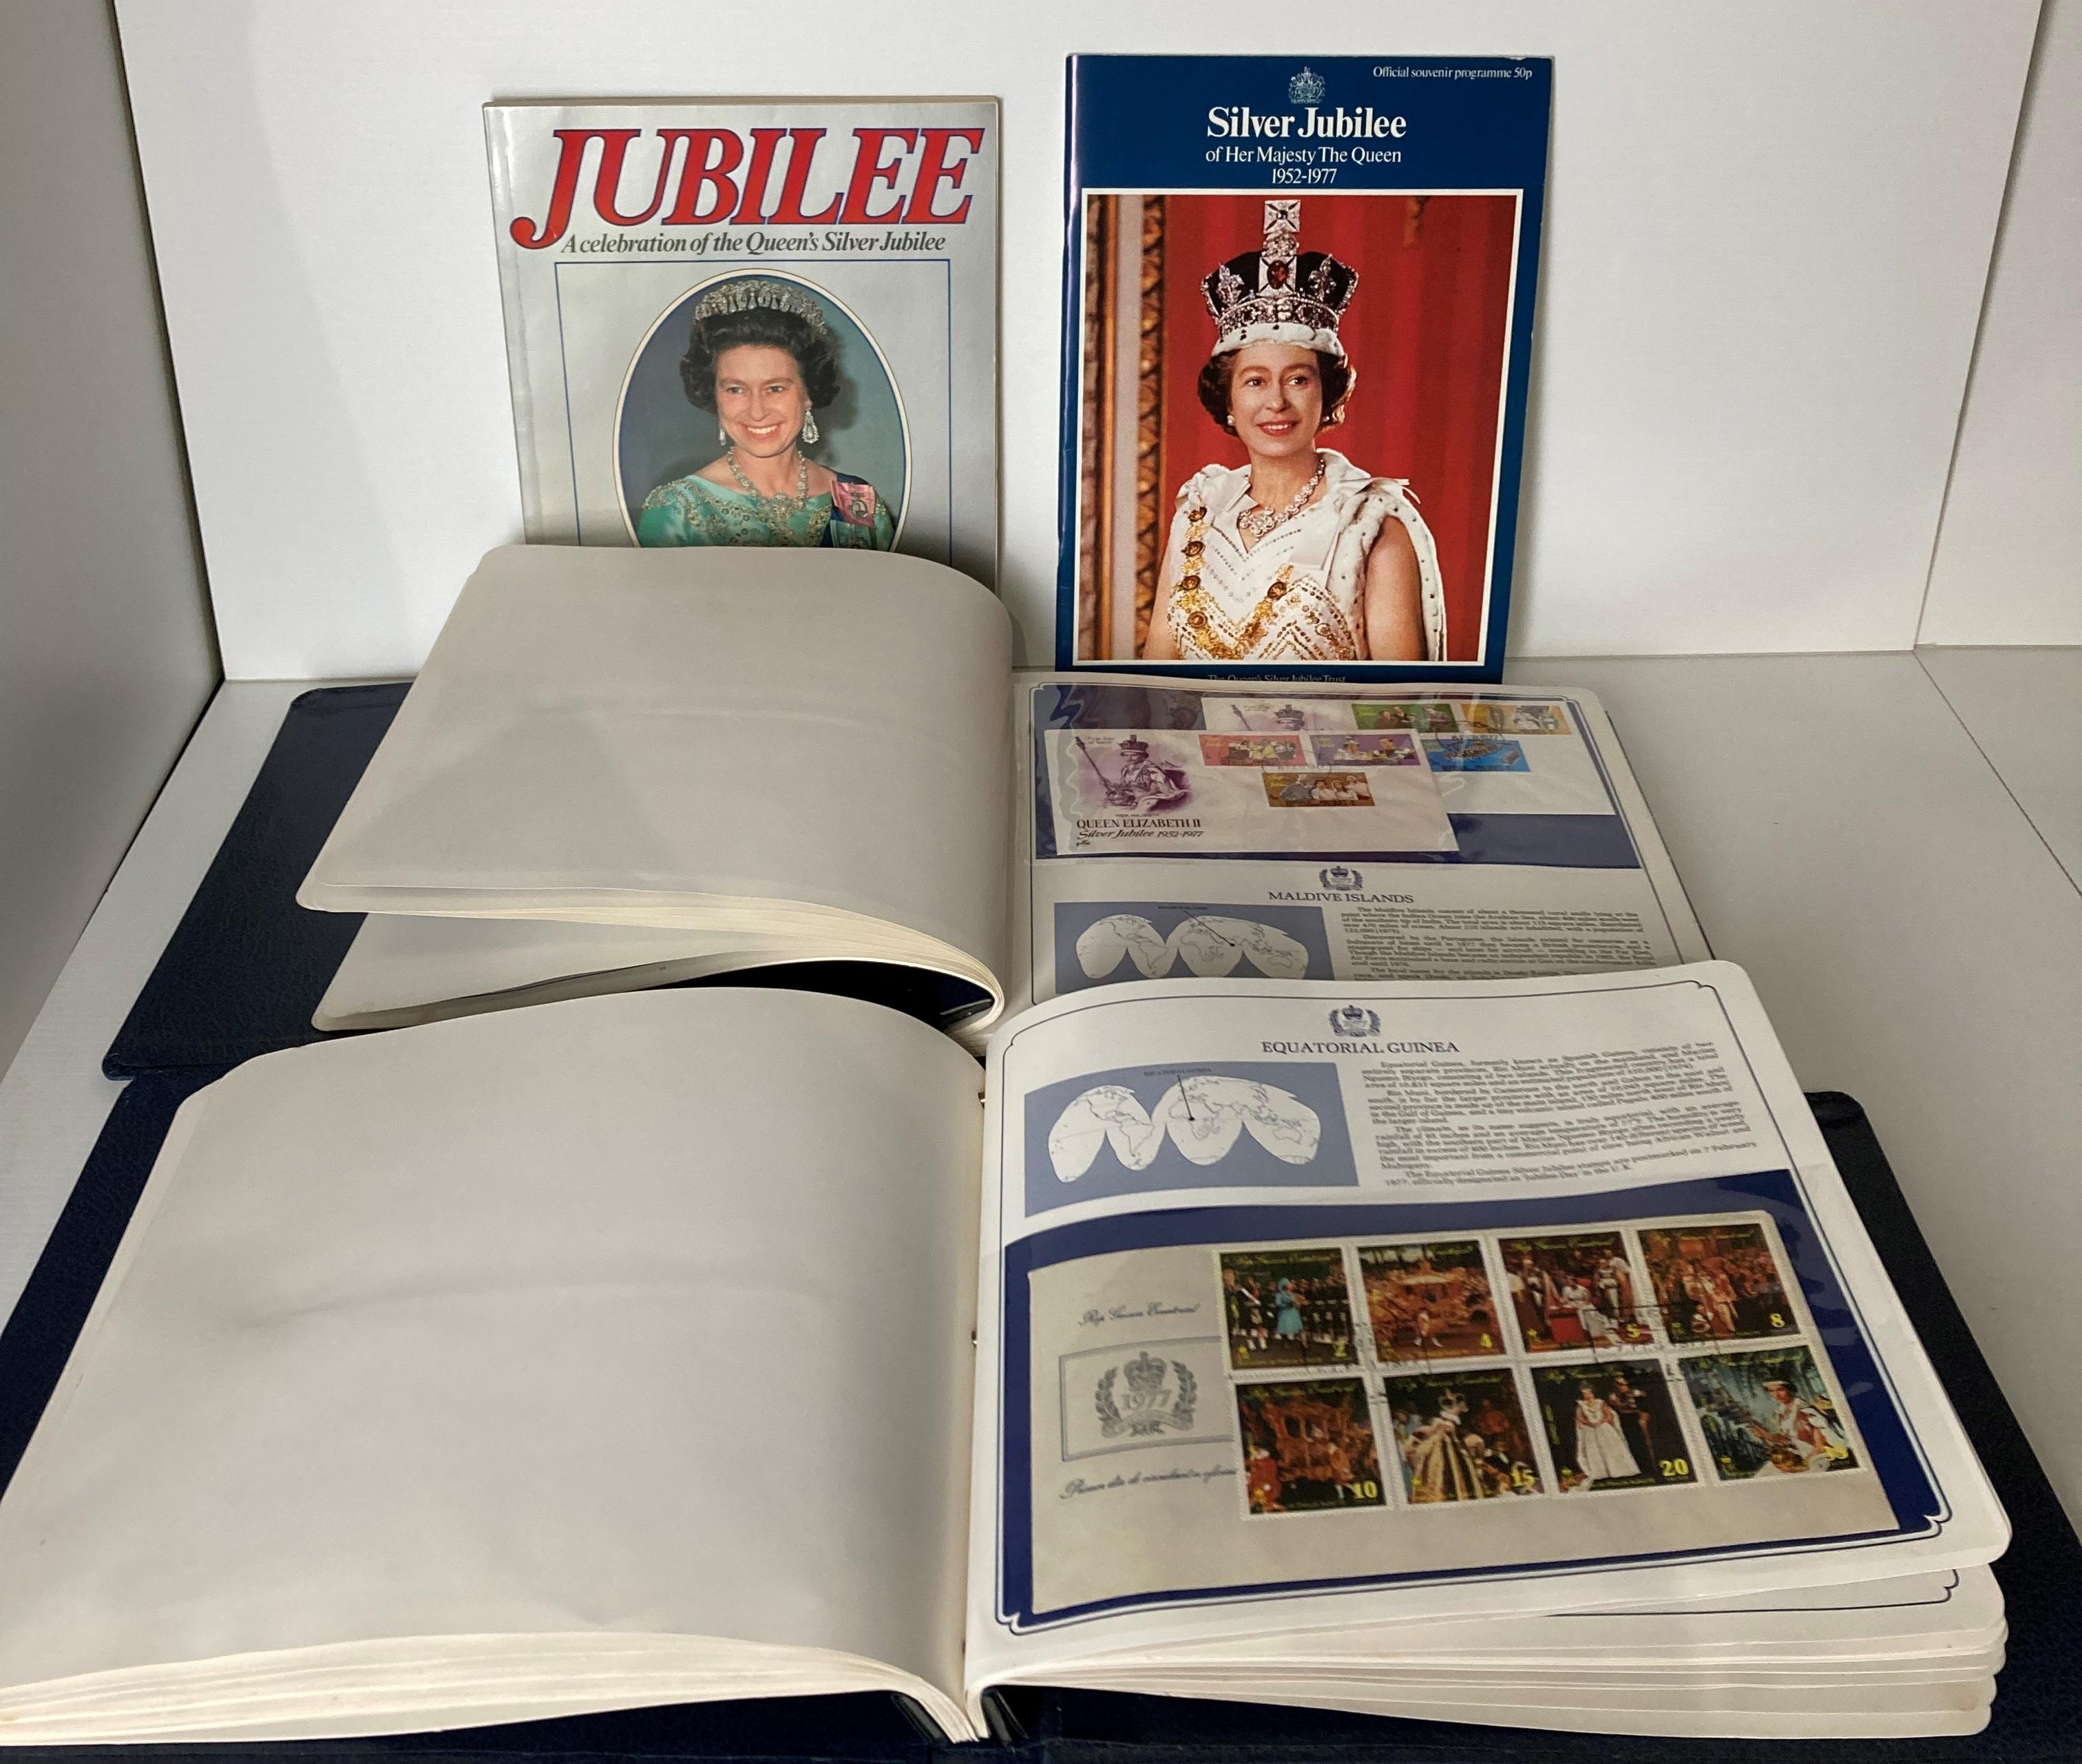 Two Queen Elizabeth II Silver Jubilee First Day Cover Albums by Postal Heritage Society and two